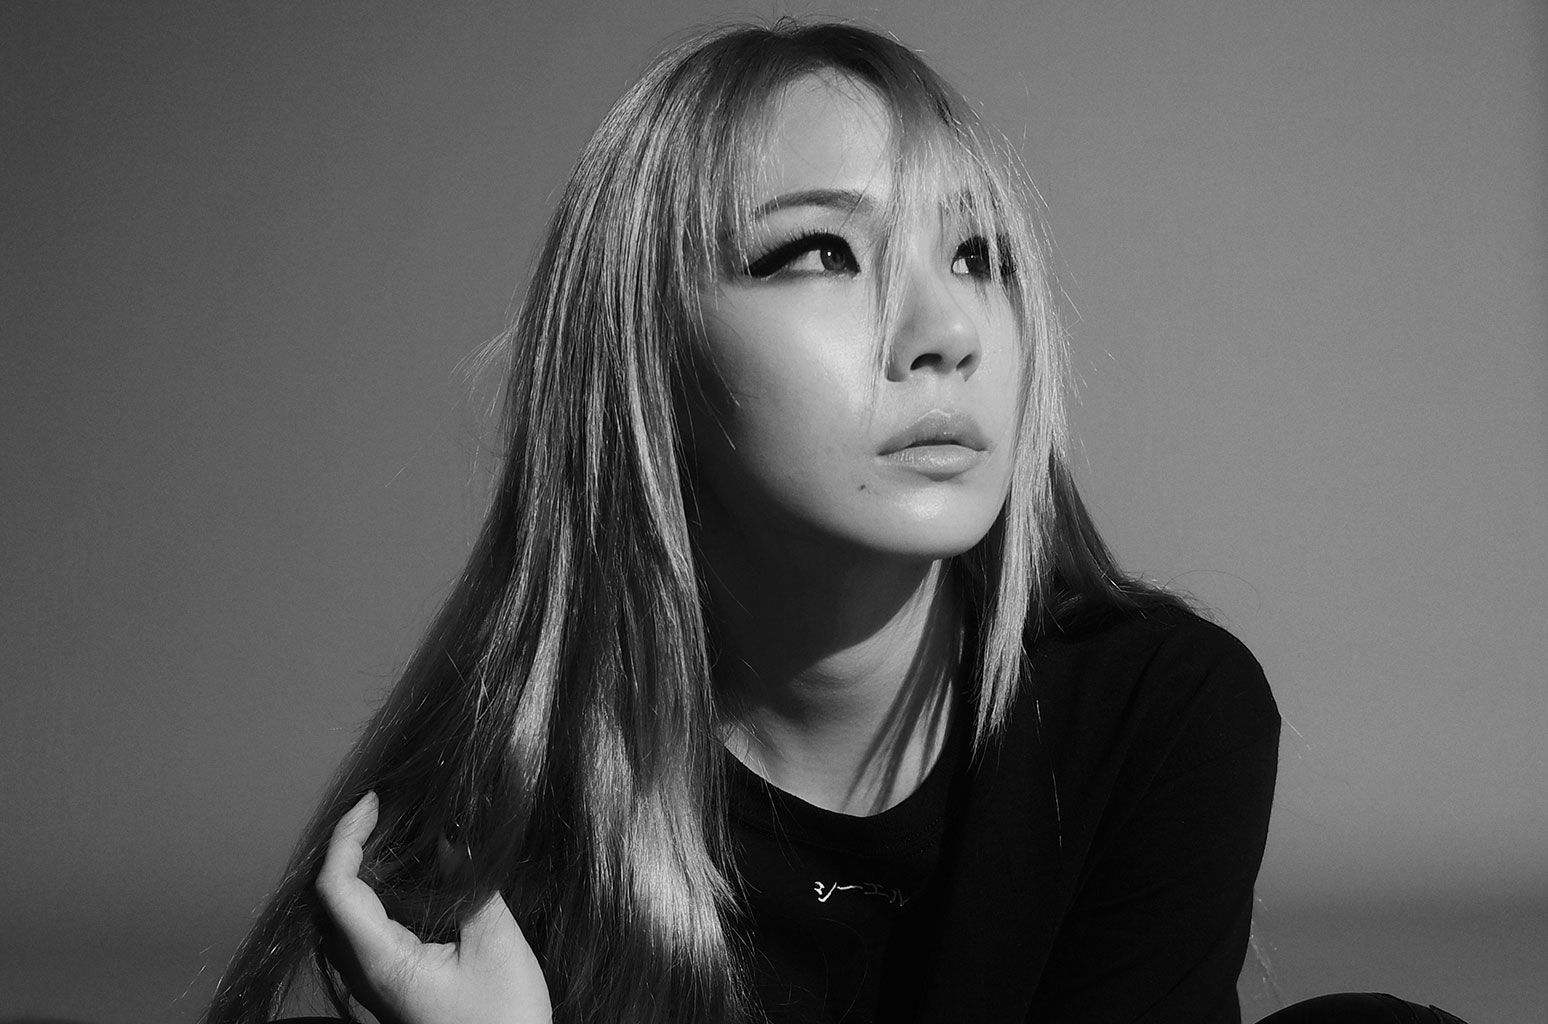 CL Rises as Independent Artist With Debut Album 'In the Name of Love': Listen - www.billboard.com - South Korea